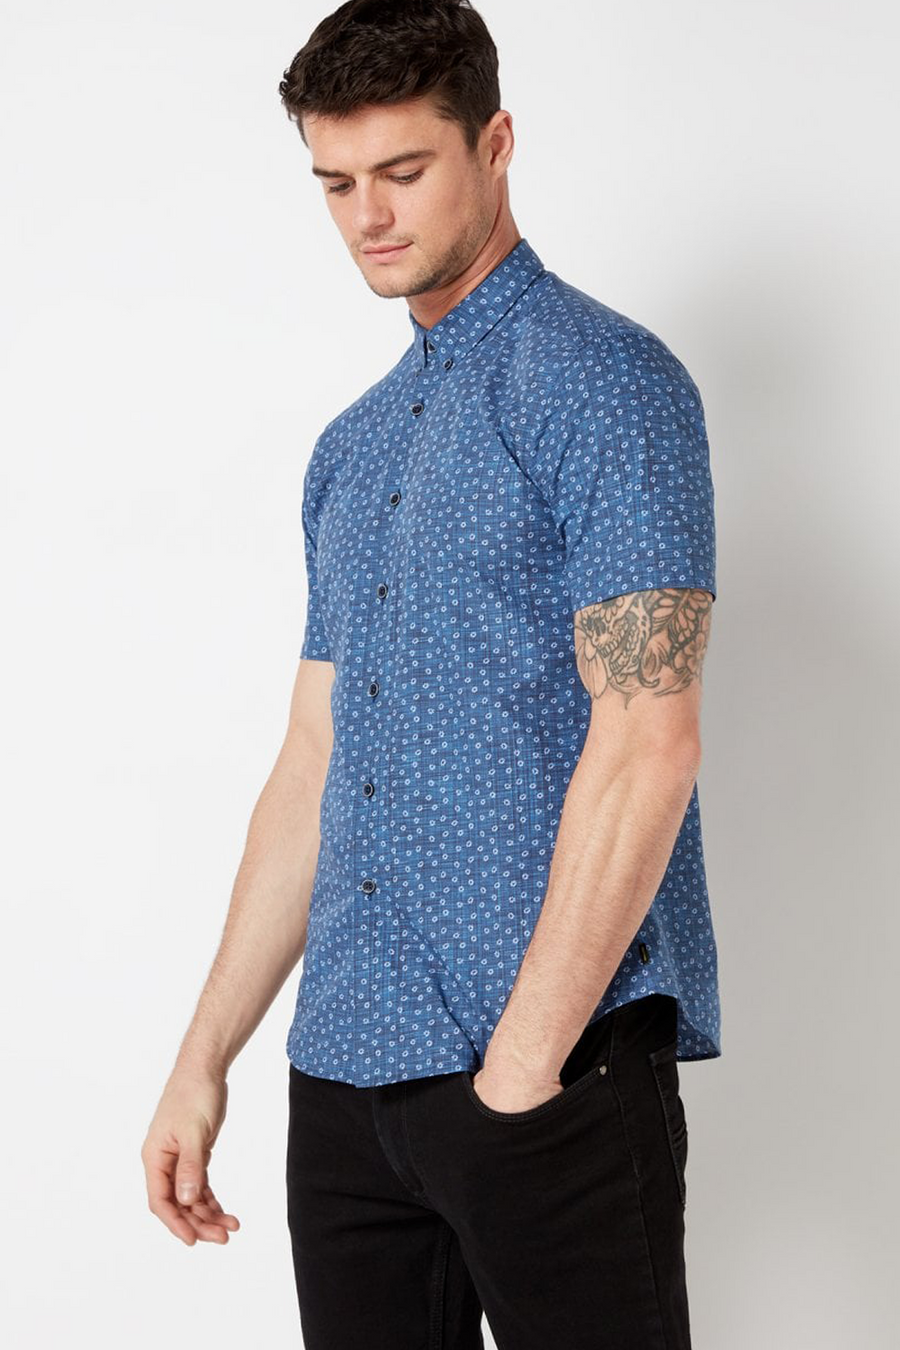 Buy the Remus Uomo Rome Dino Short Sleeve Dark Blue at Intro. Spend £50 for free UK delivery. Official stockists. We ship worldwide.